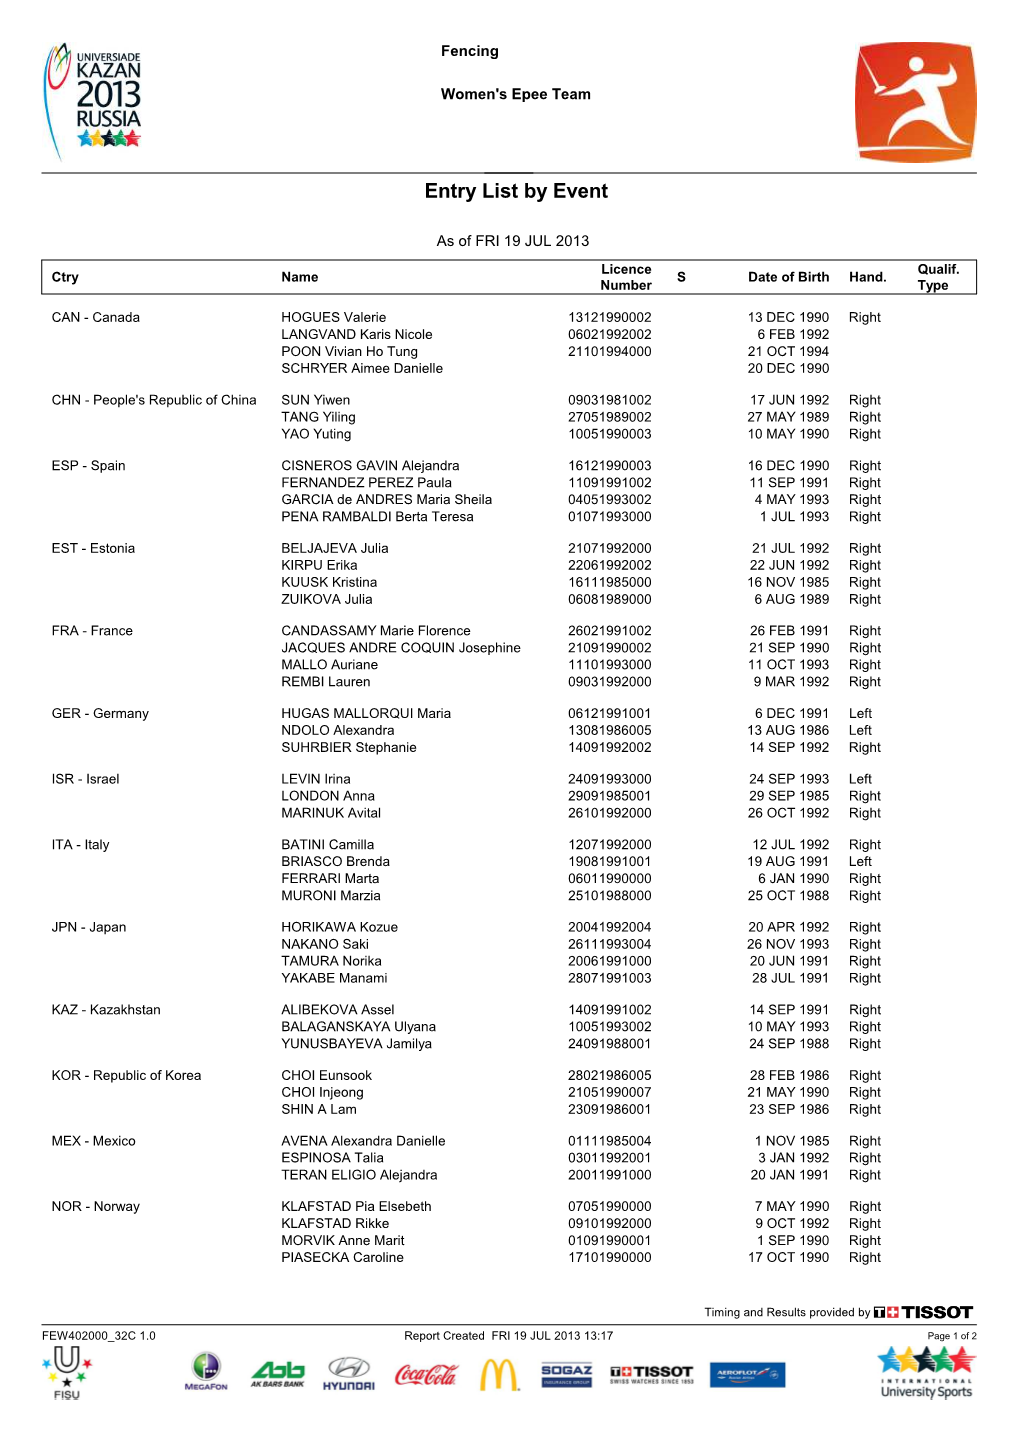 Entry List by Event